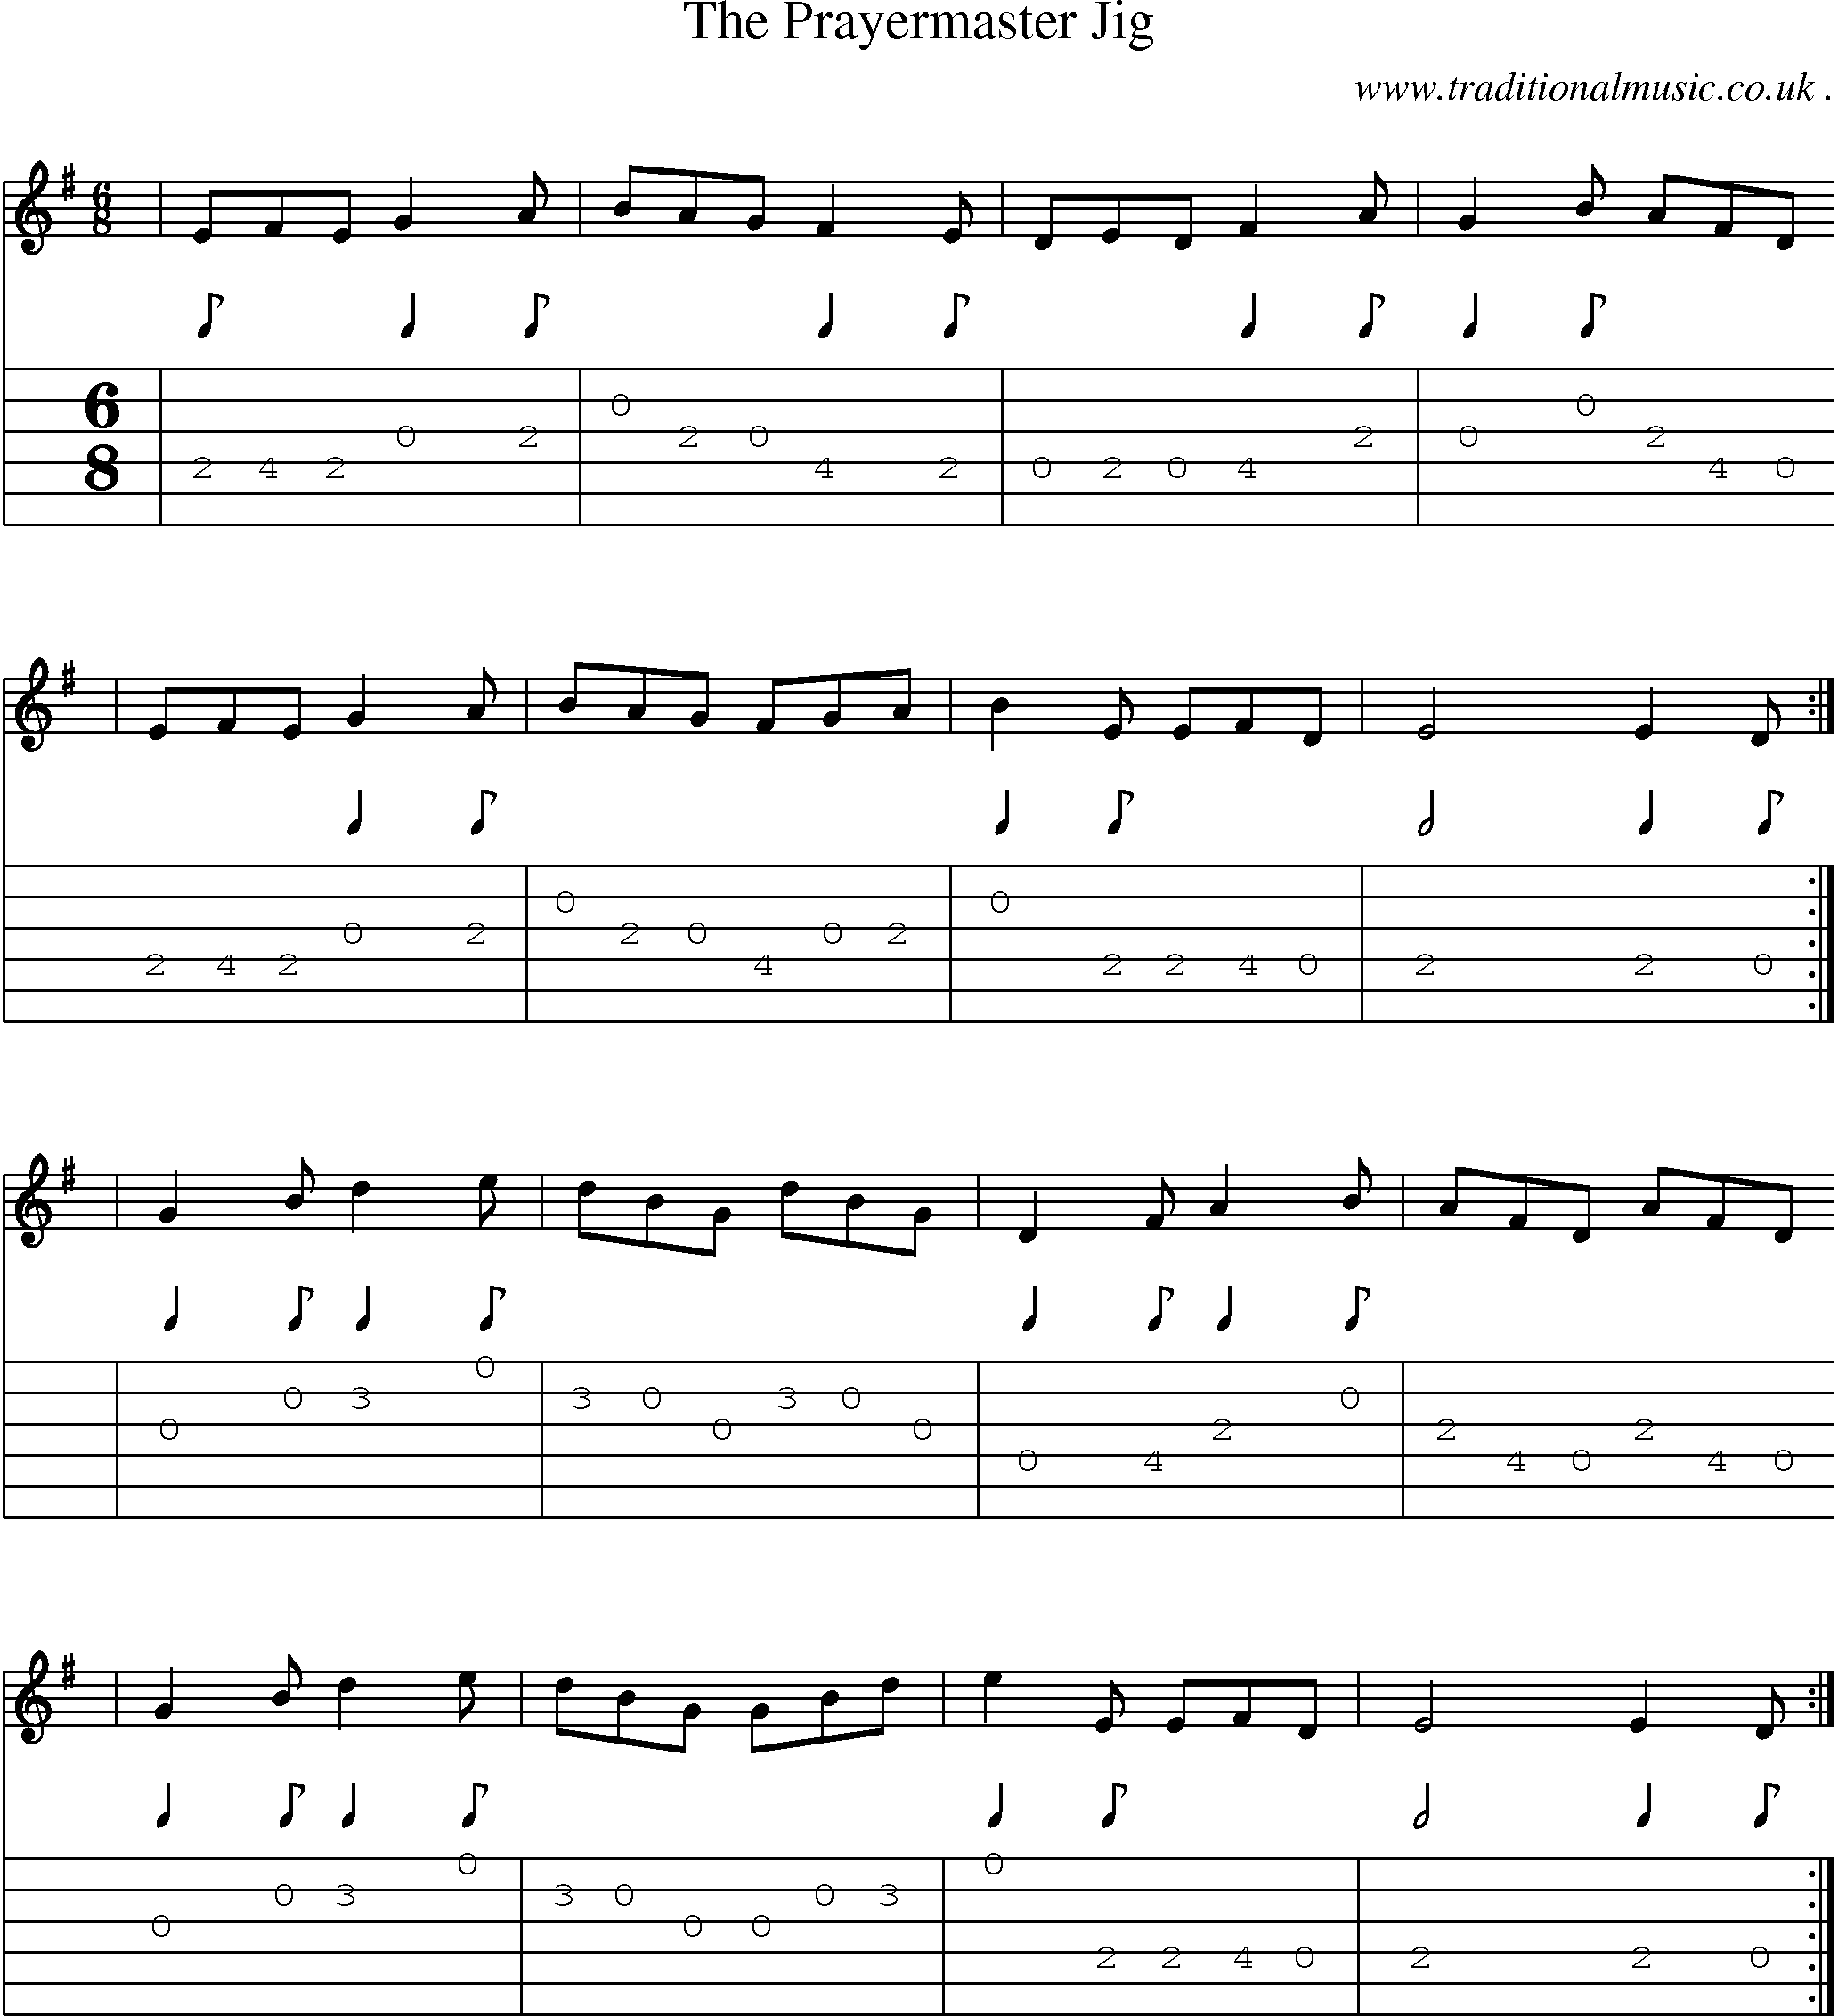 Sheet-Music and Guitar Tabs for The Prayermaster Jig